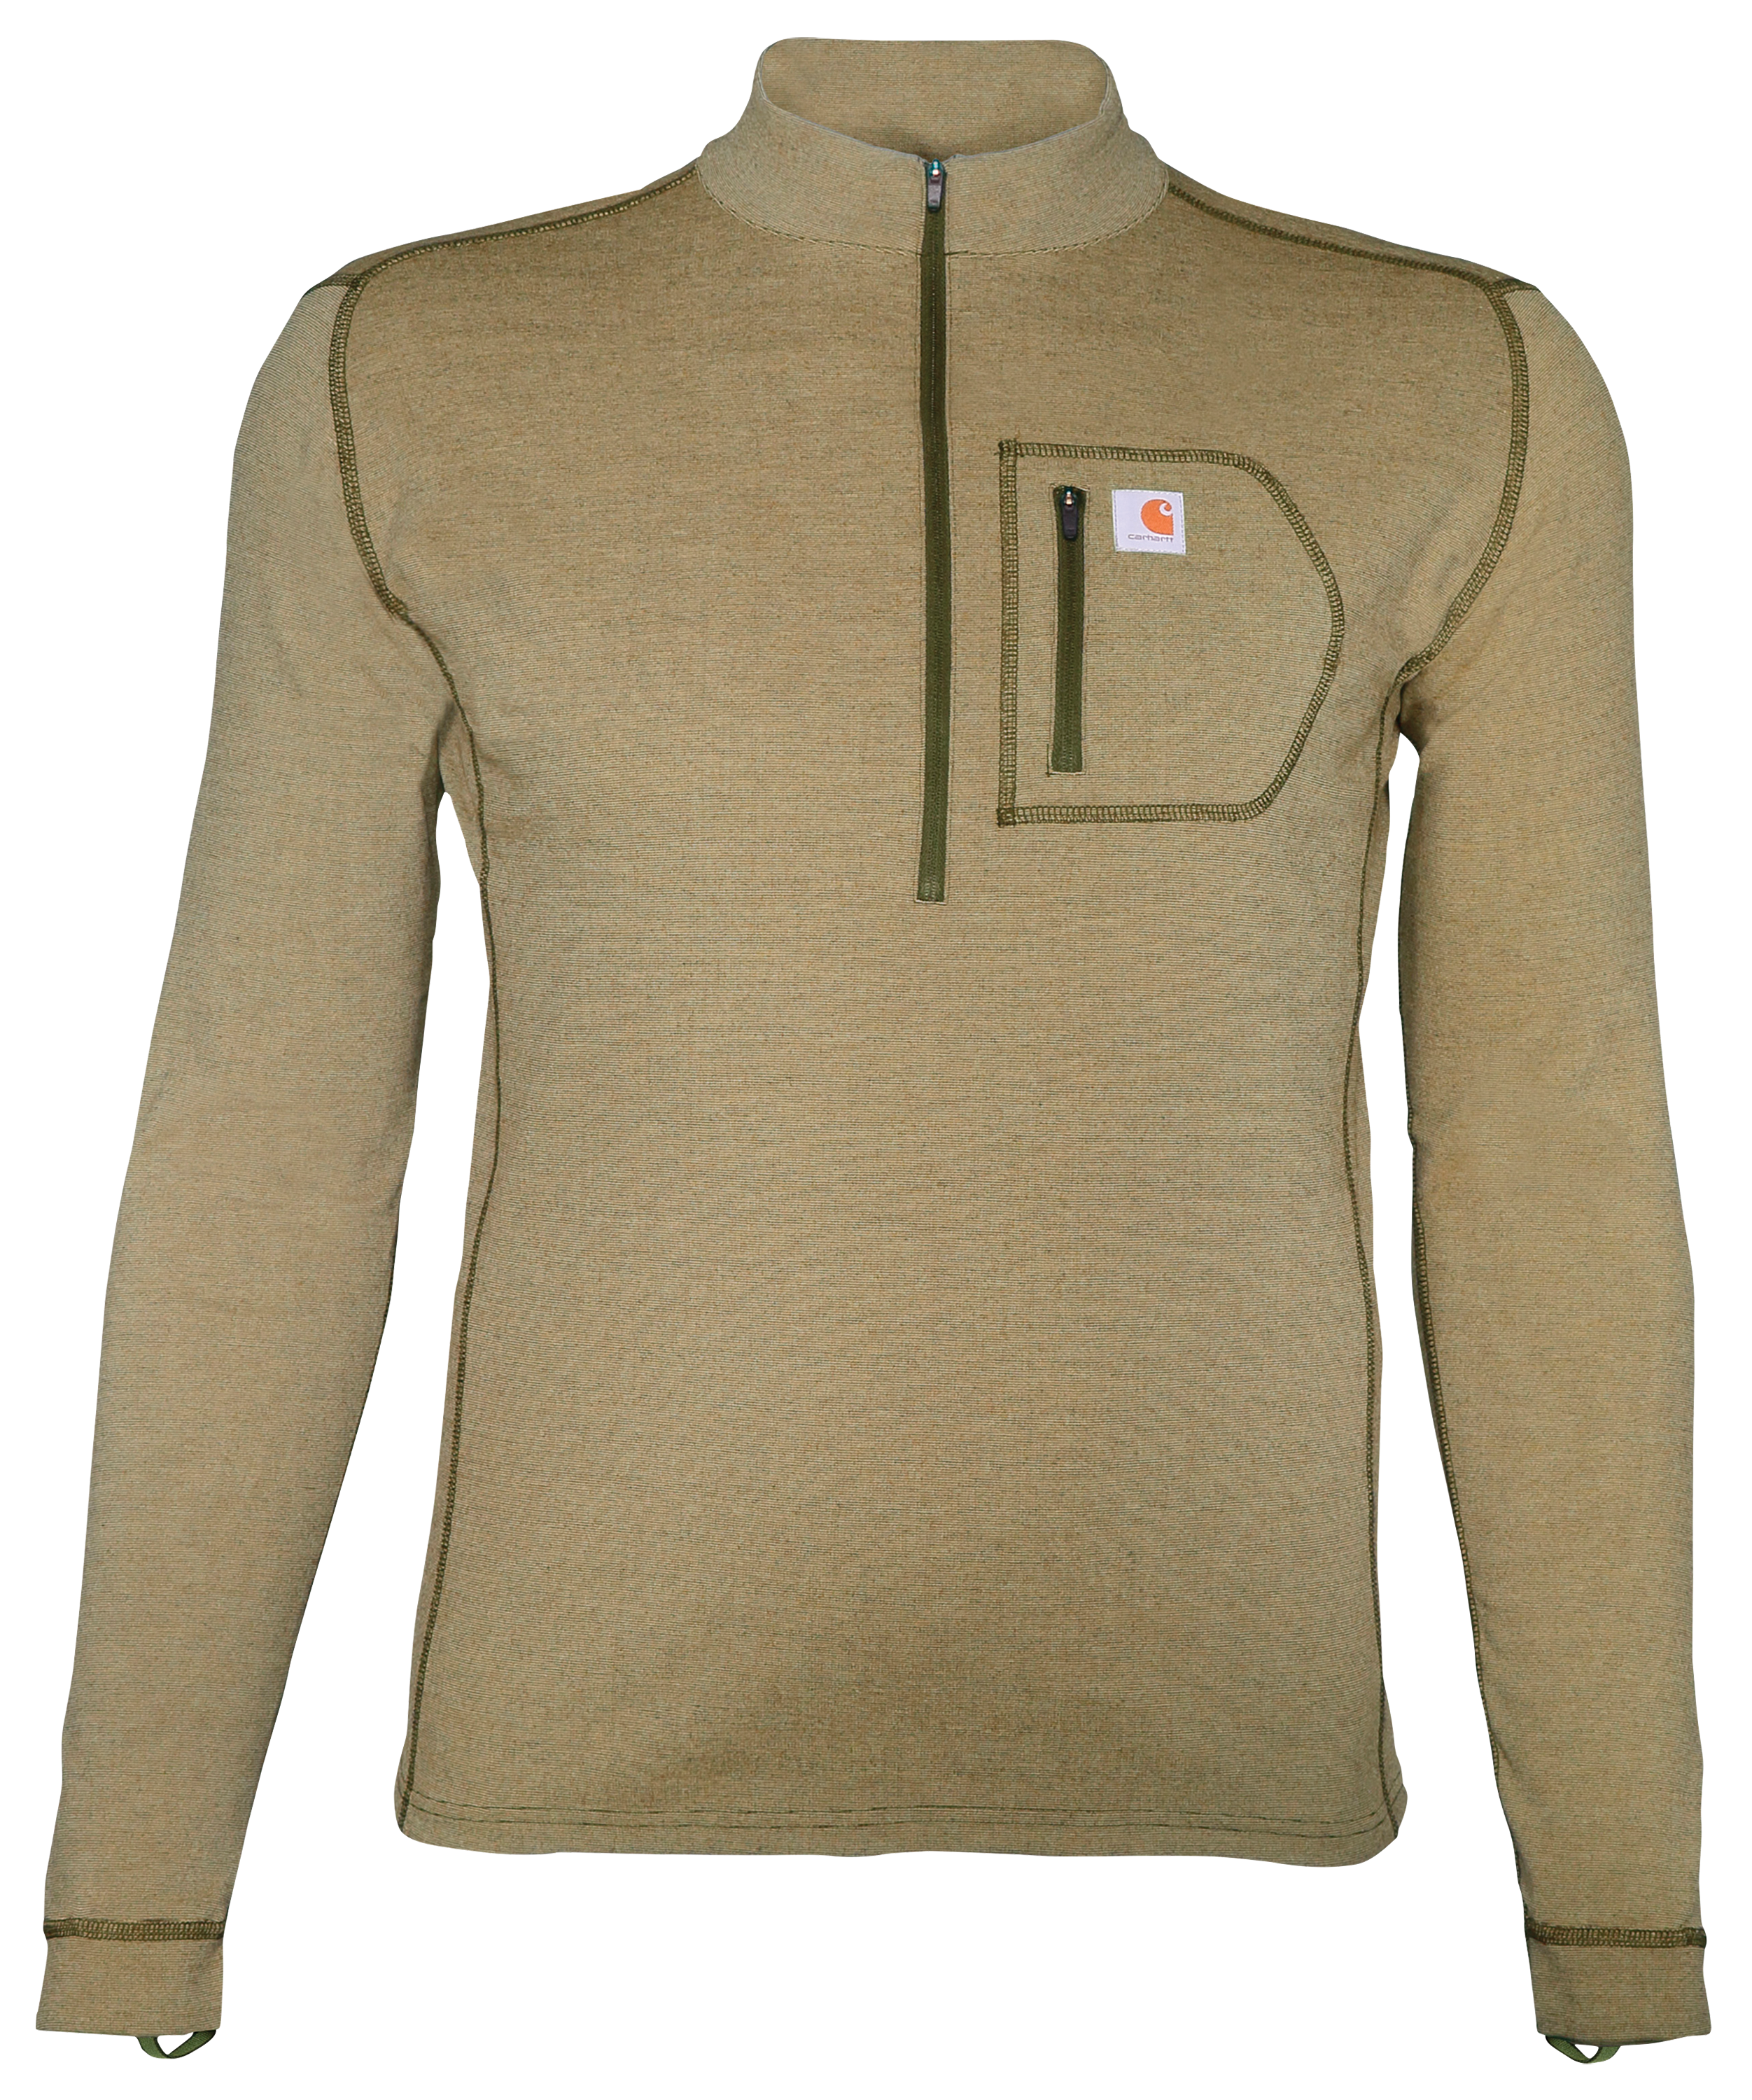 Men's Base Layer Thermal Shirt - Carhartt Force® - Midweight - 100% Cotton, Men's Best Sellers